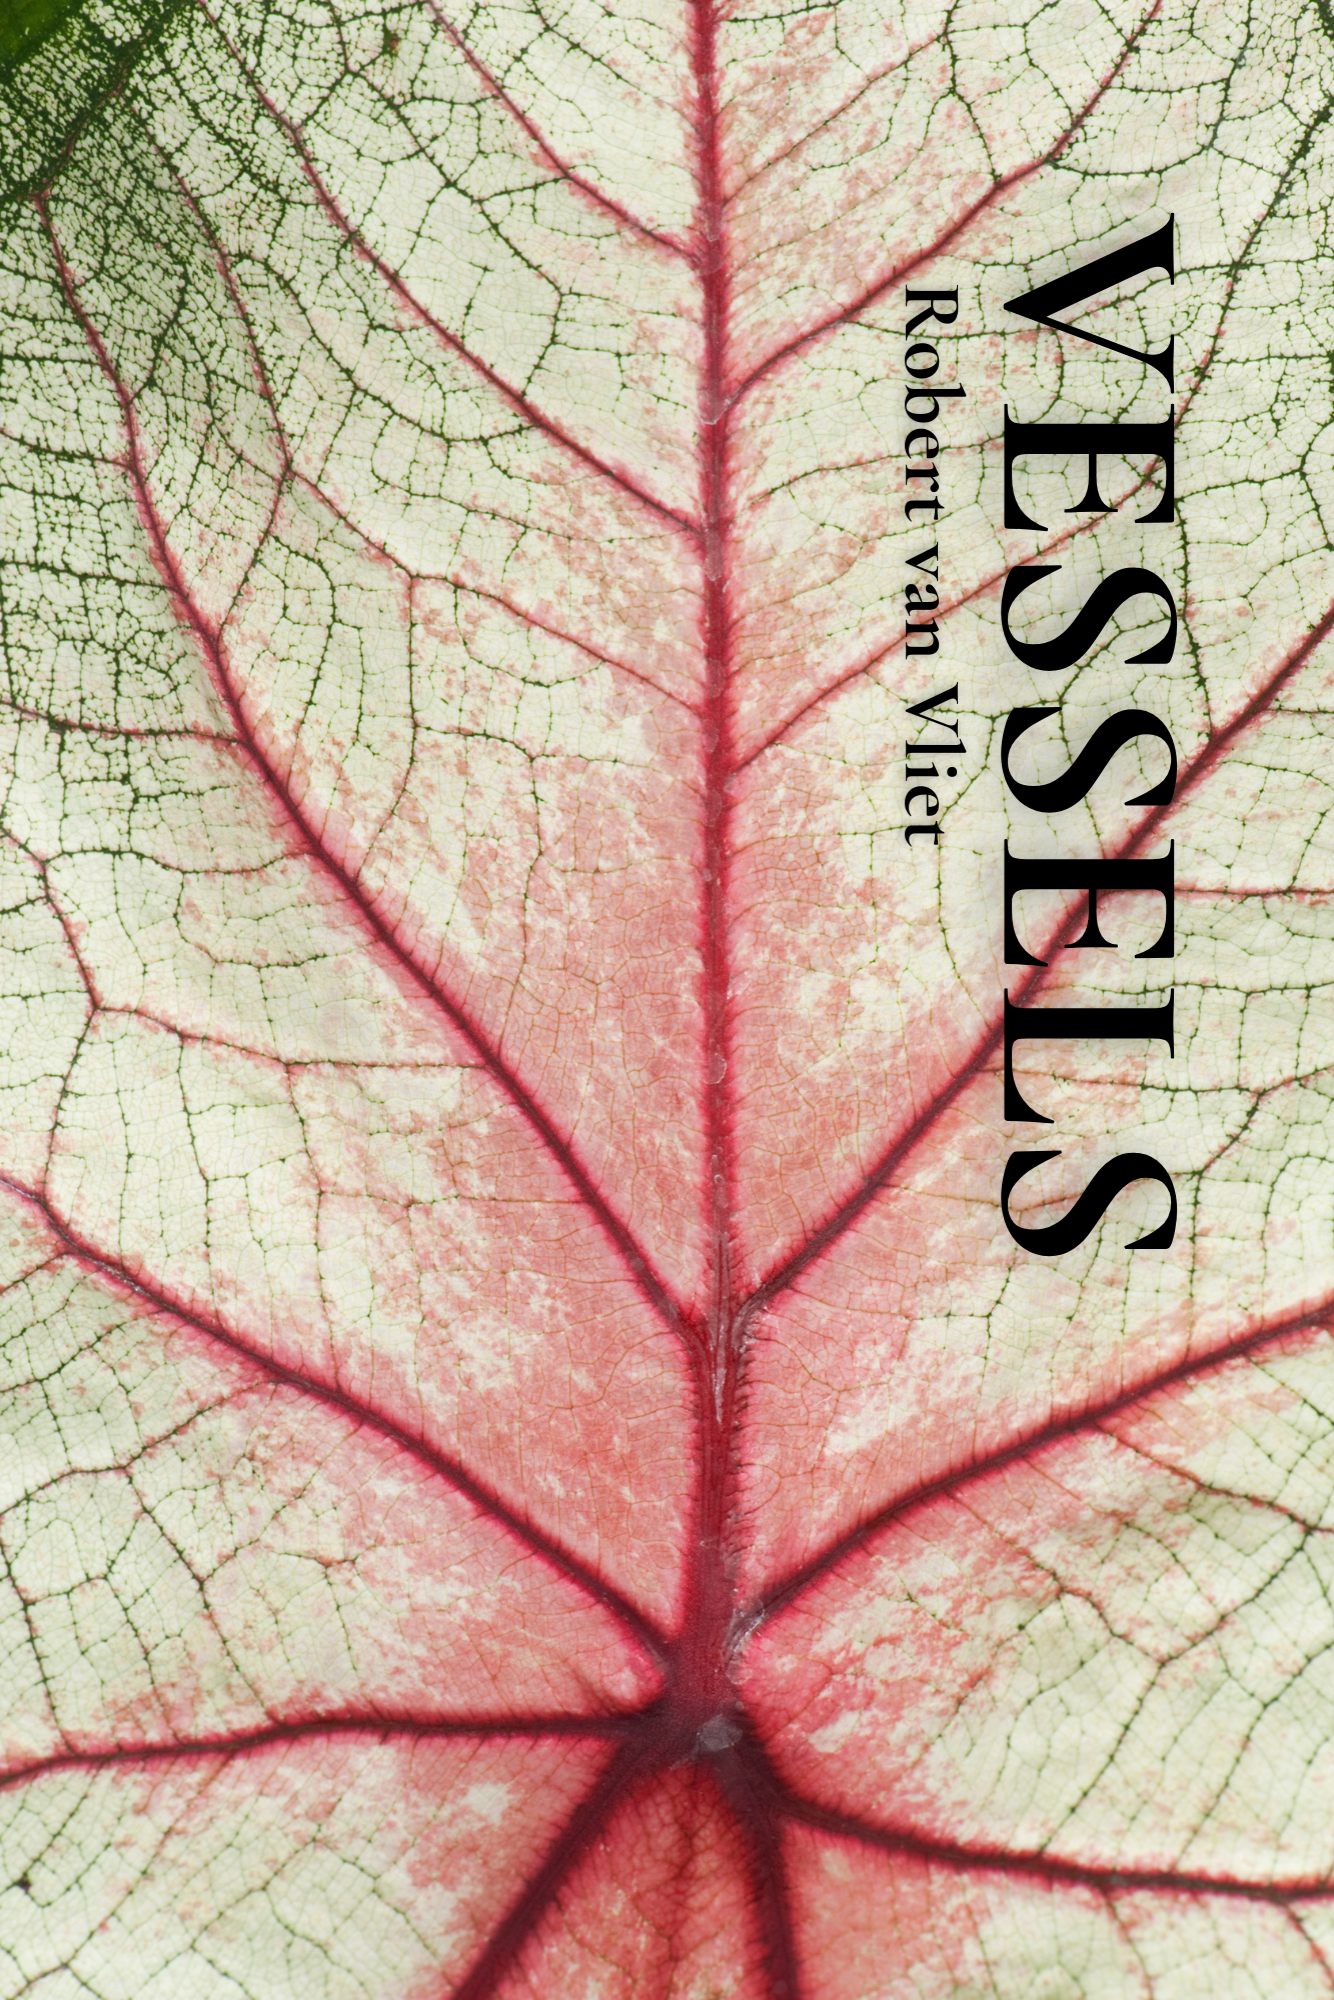 the detail of a leaf, mostly pale green with darker green veins, fading to deep red at its spine, and the text 'VESSELS Robert van Vliet' printed vertically on one side